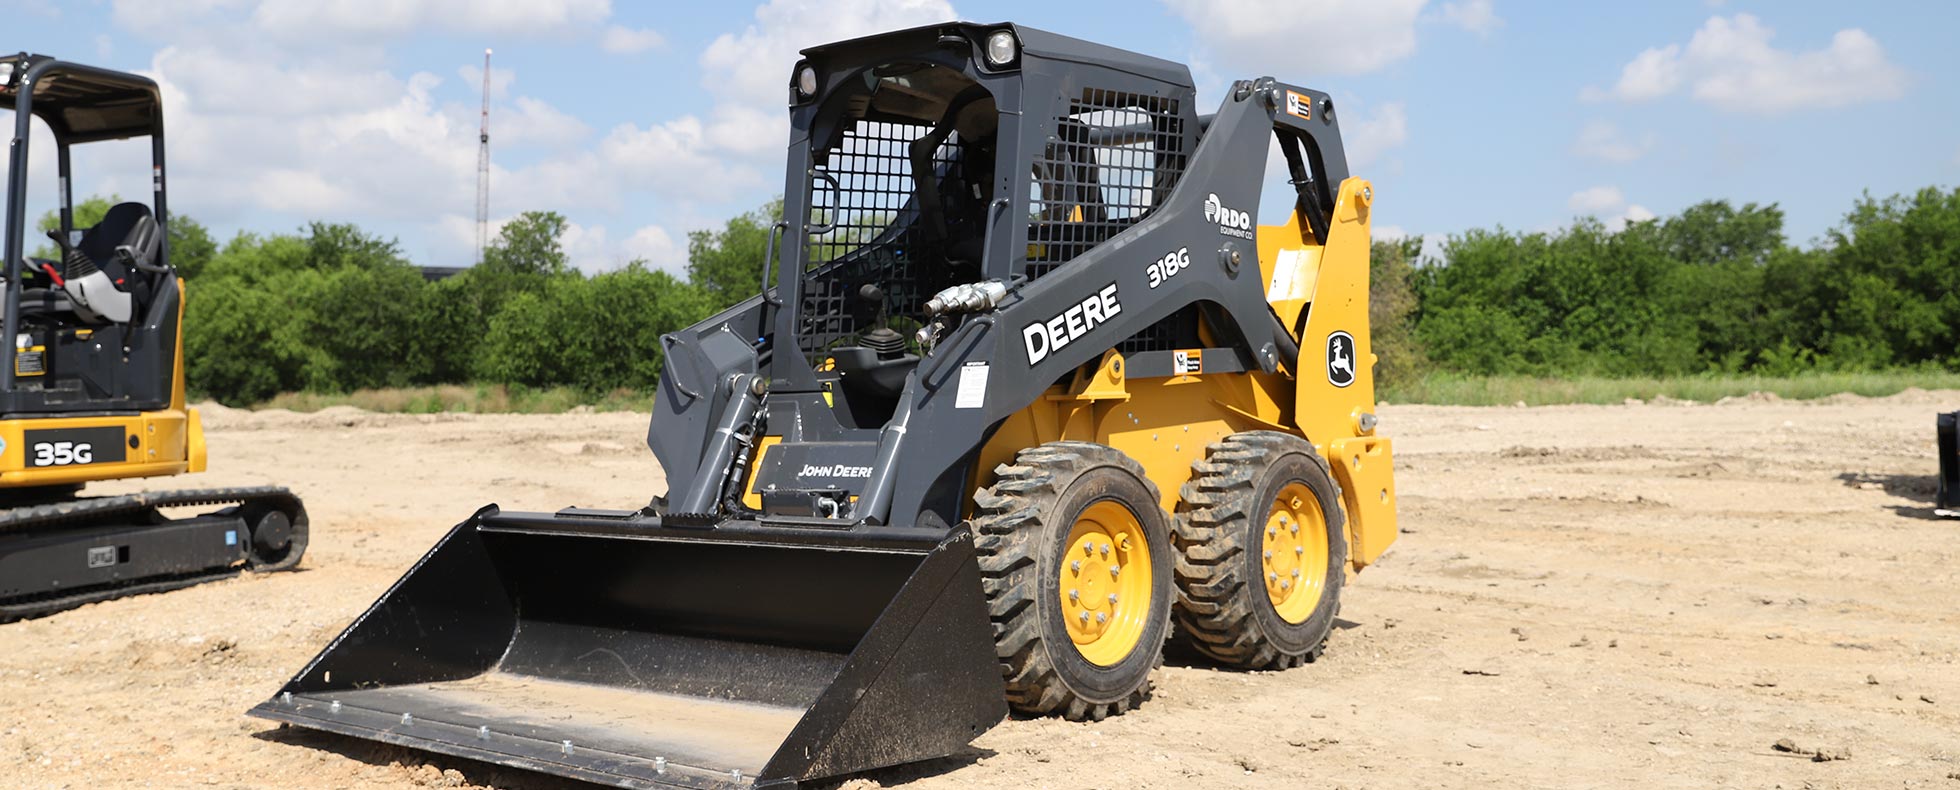 Landscape Equipment and Support - Deere Compact Construction Equipment